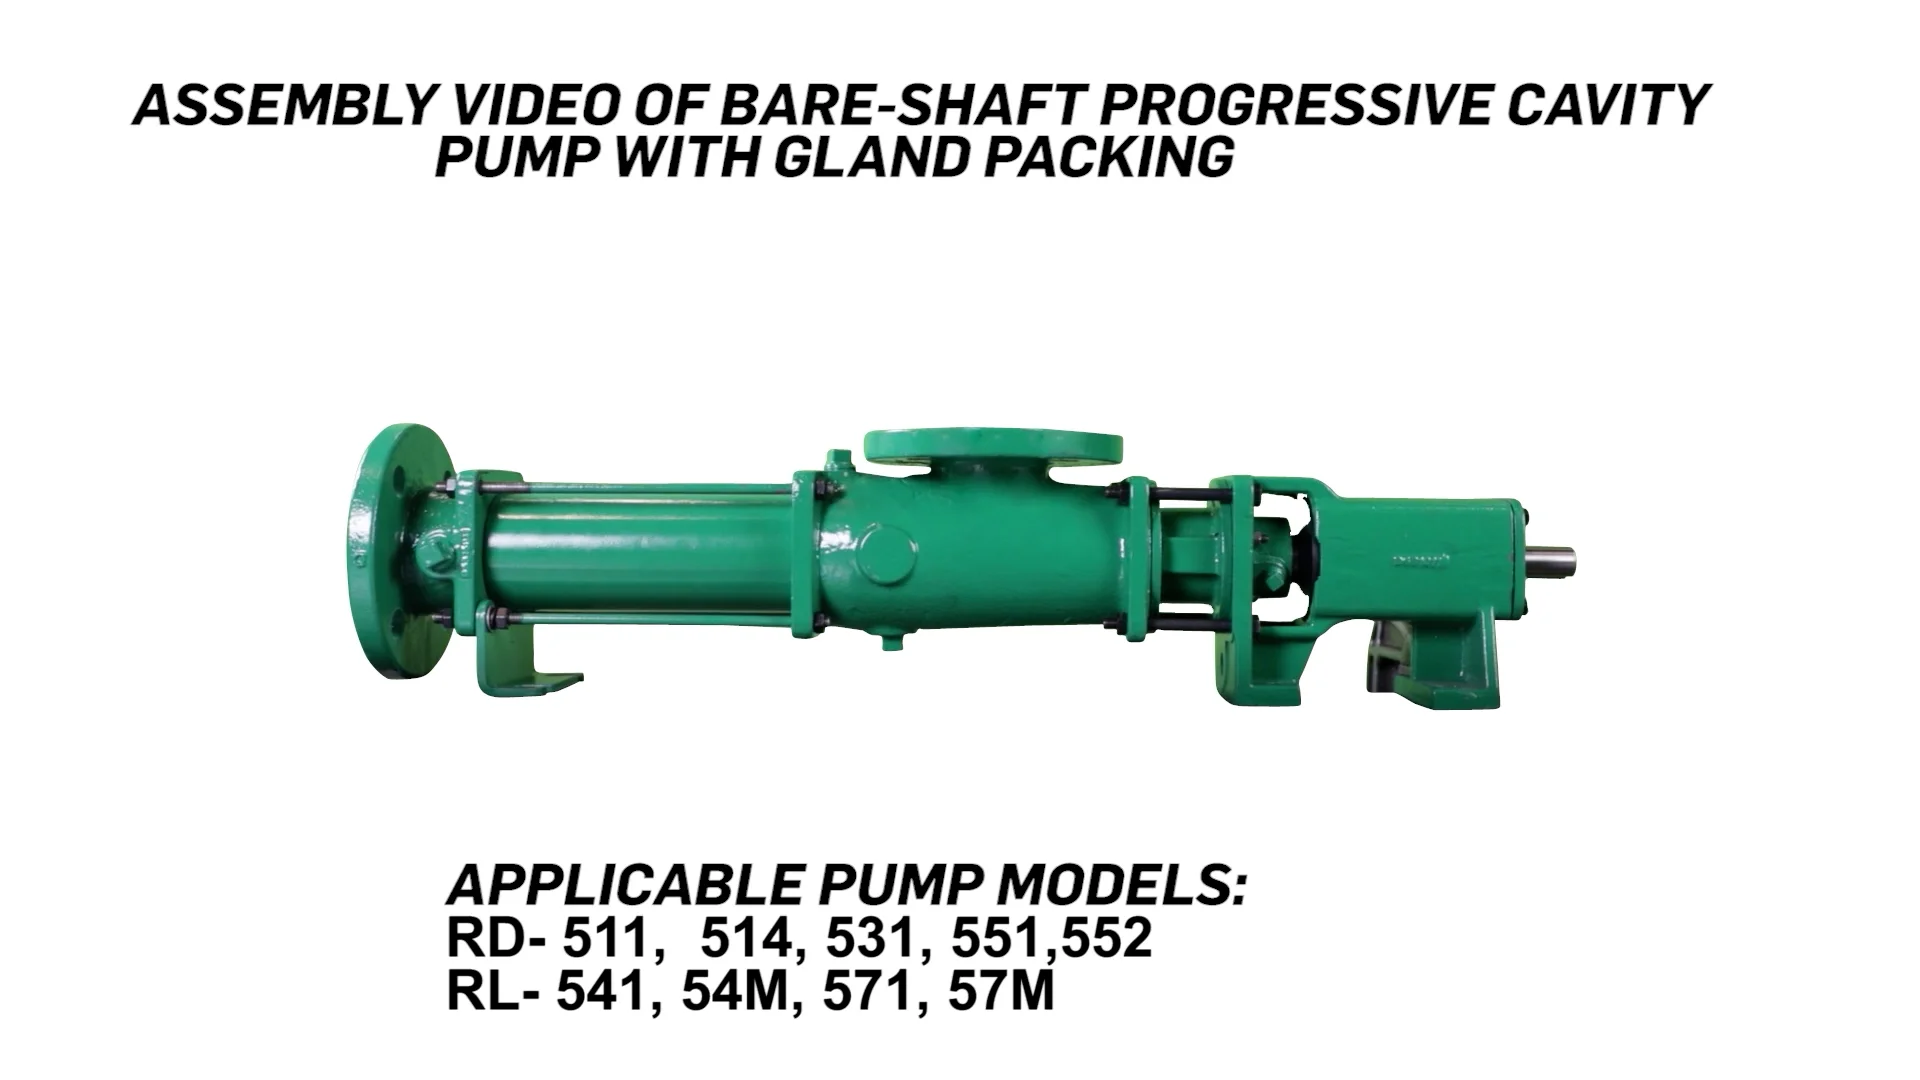 How to assemble the Perifit Pump on Vimeo